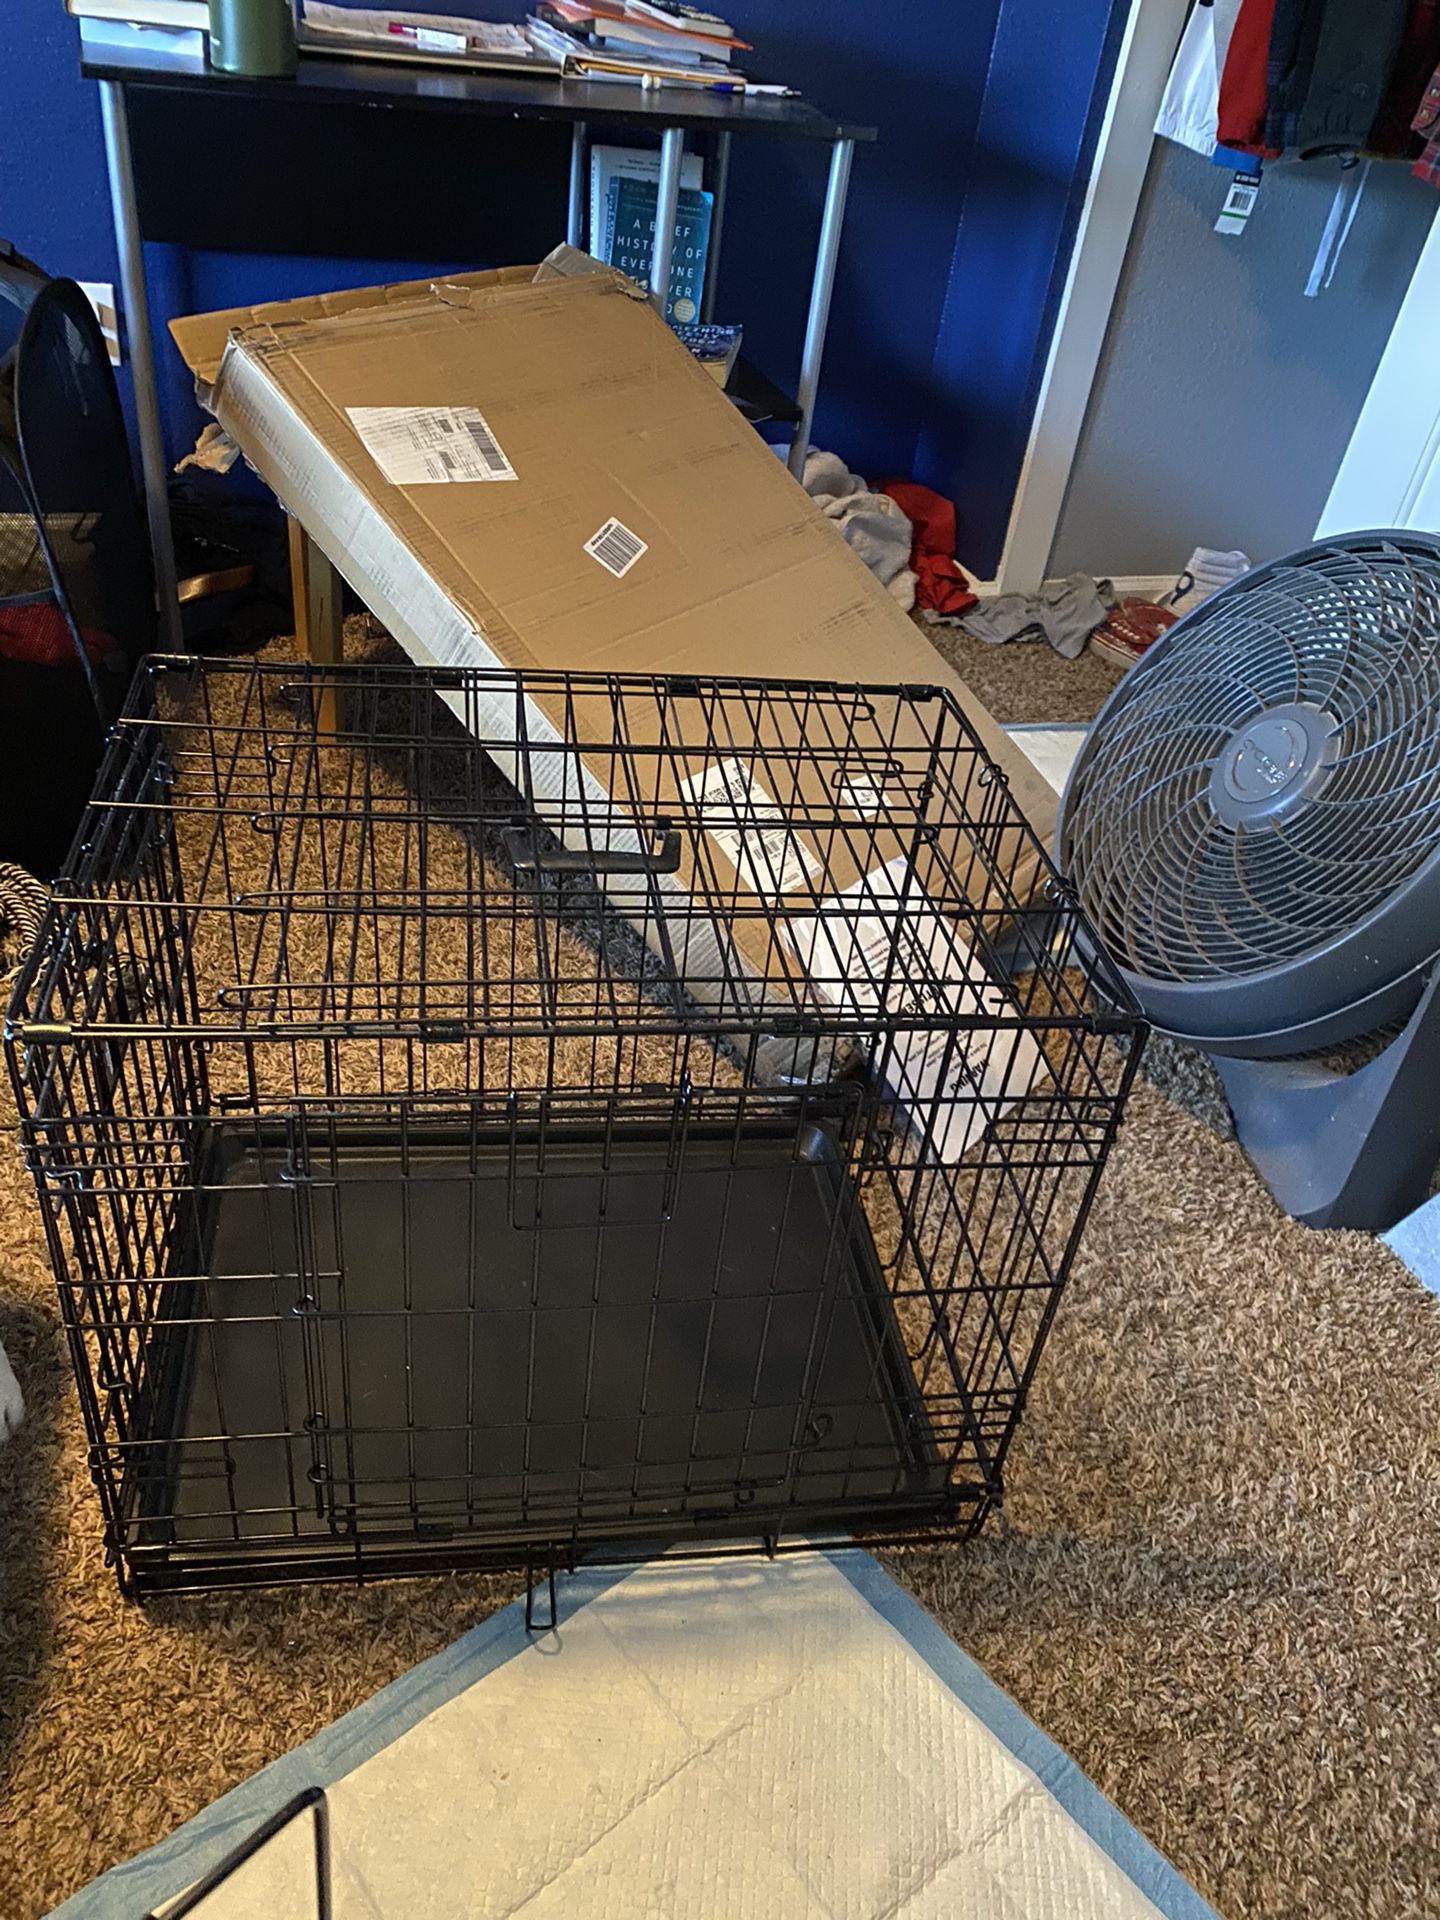 Top Paw 24” Crate